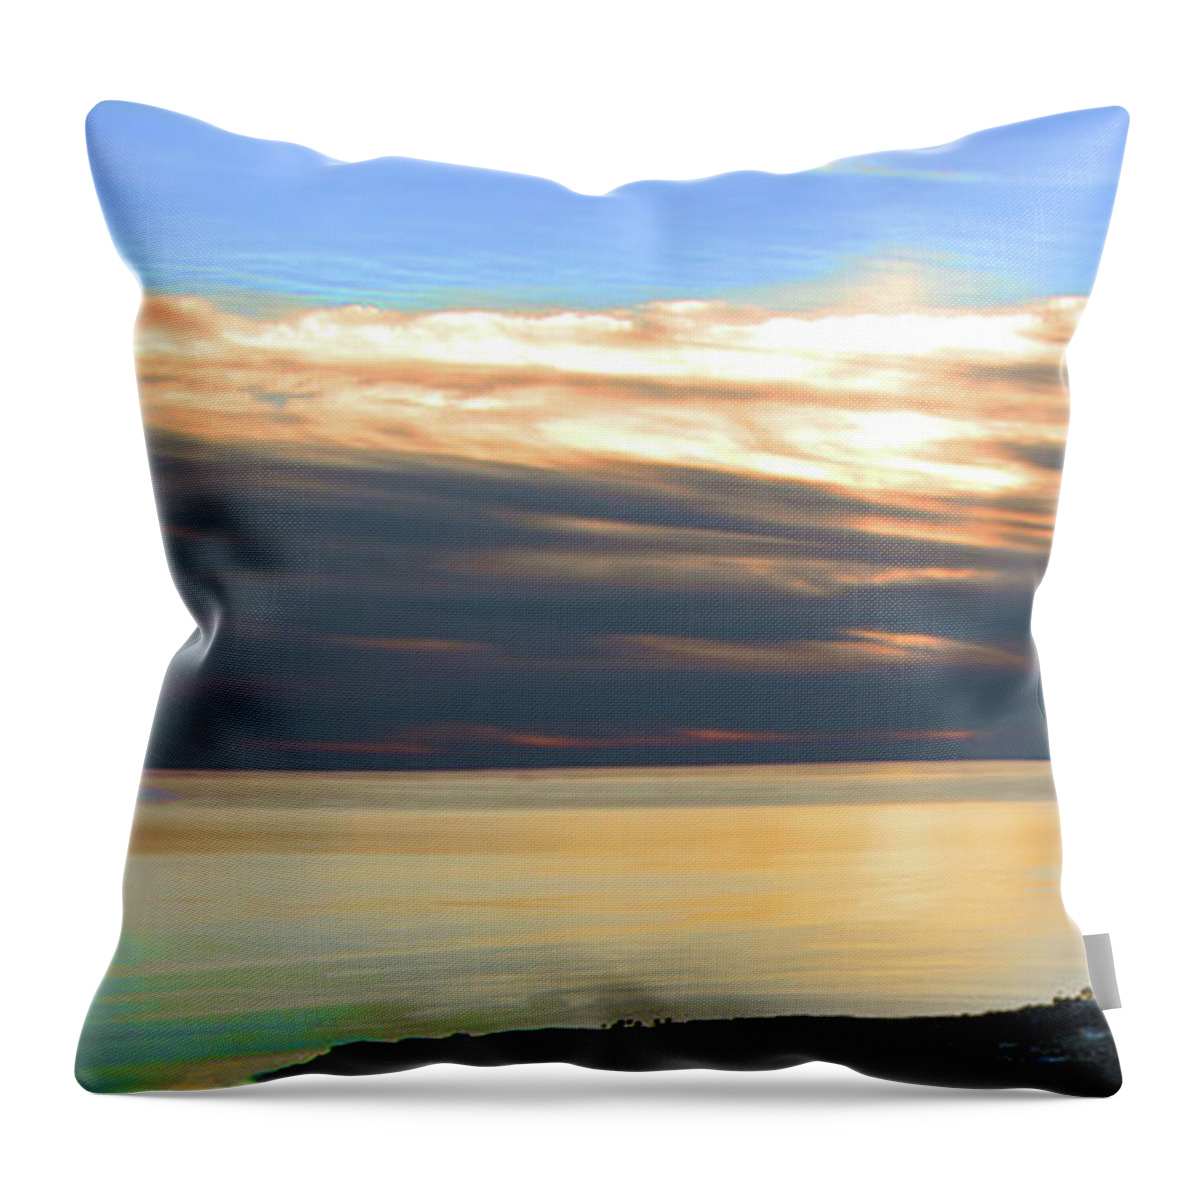 Sunset Throw Pillow featuring the photograph Ominous Sunset by Ed Clark